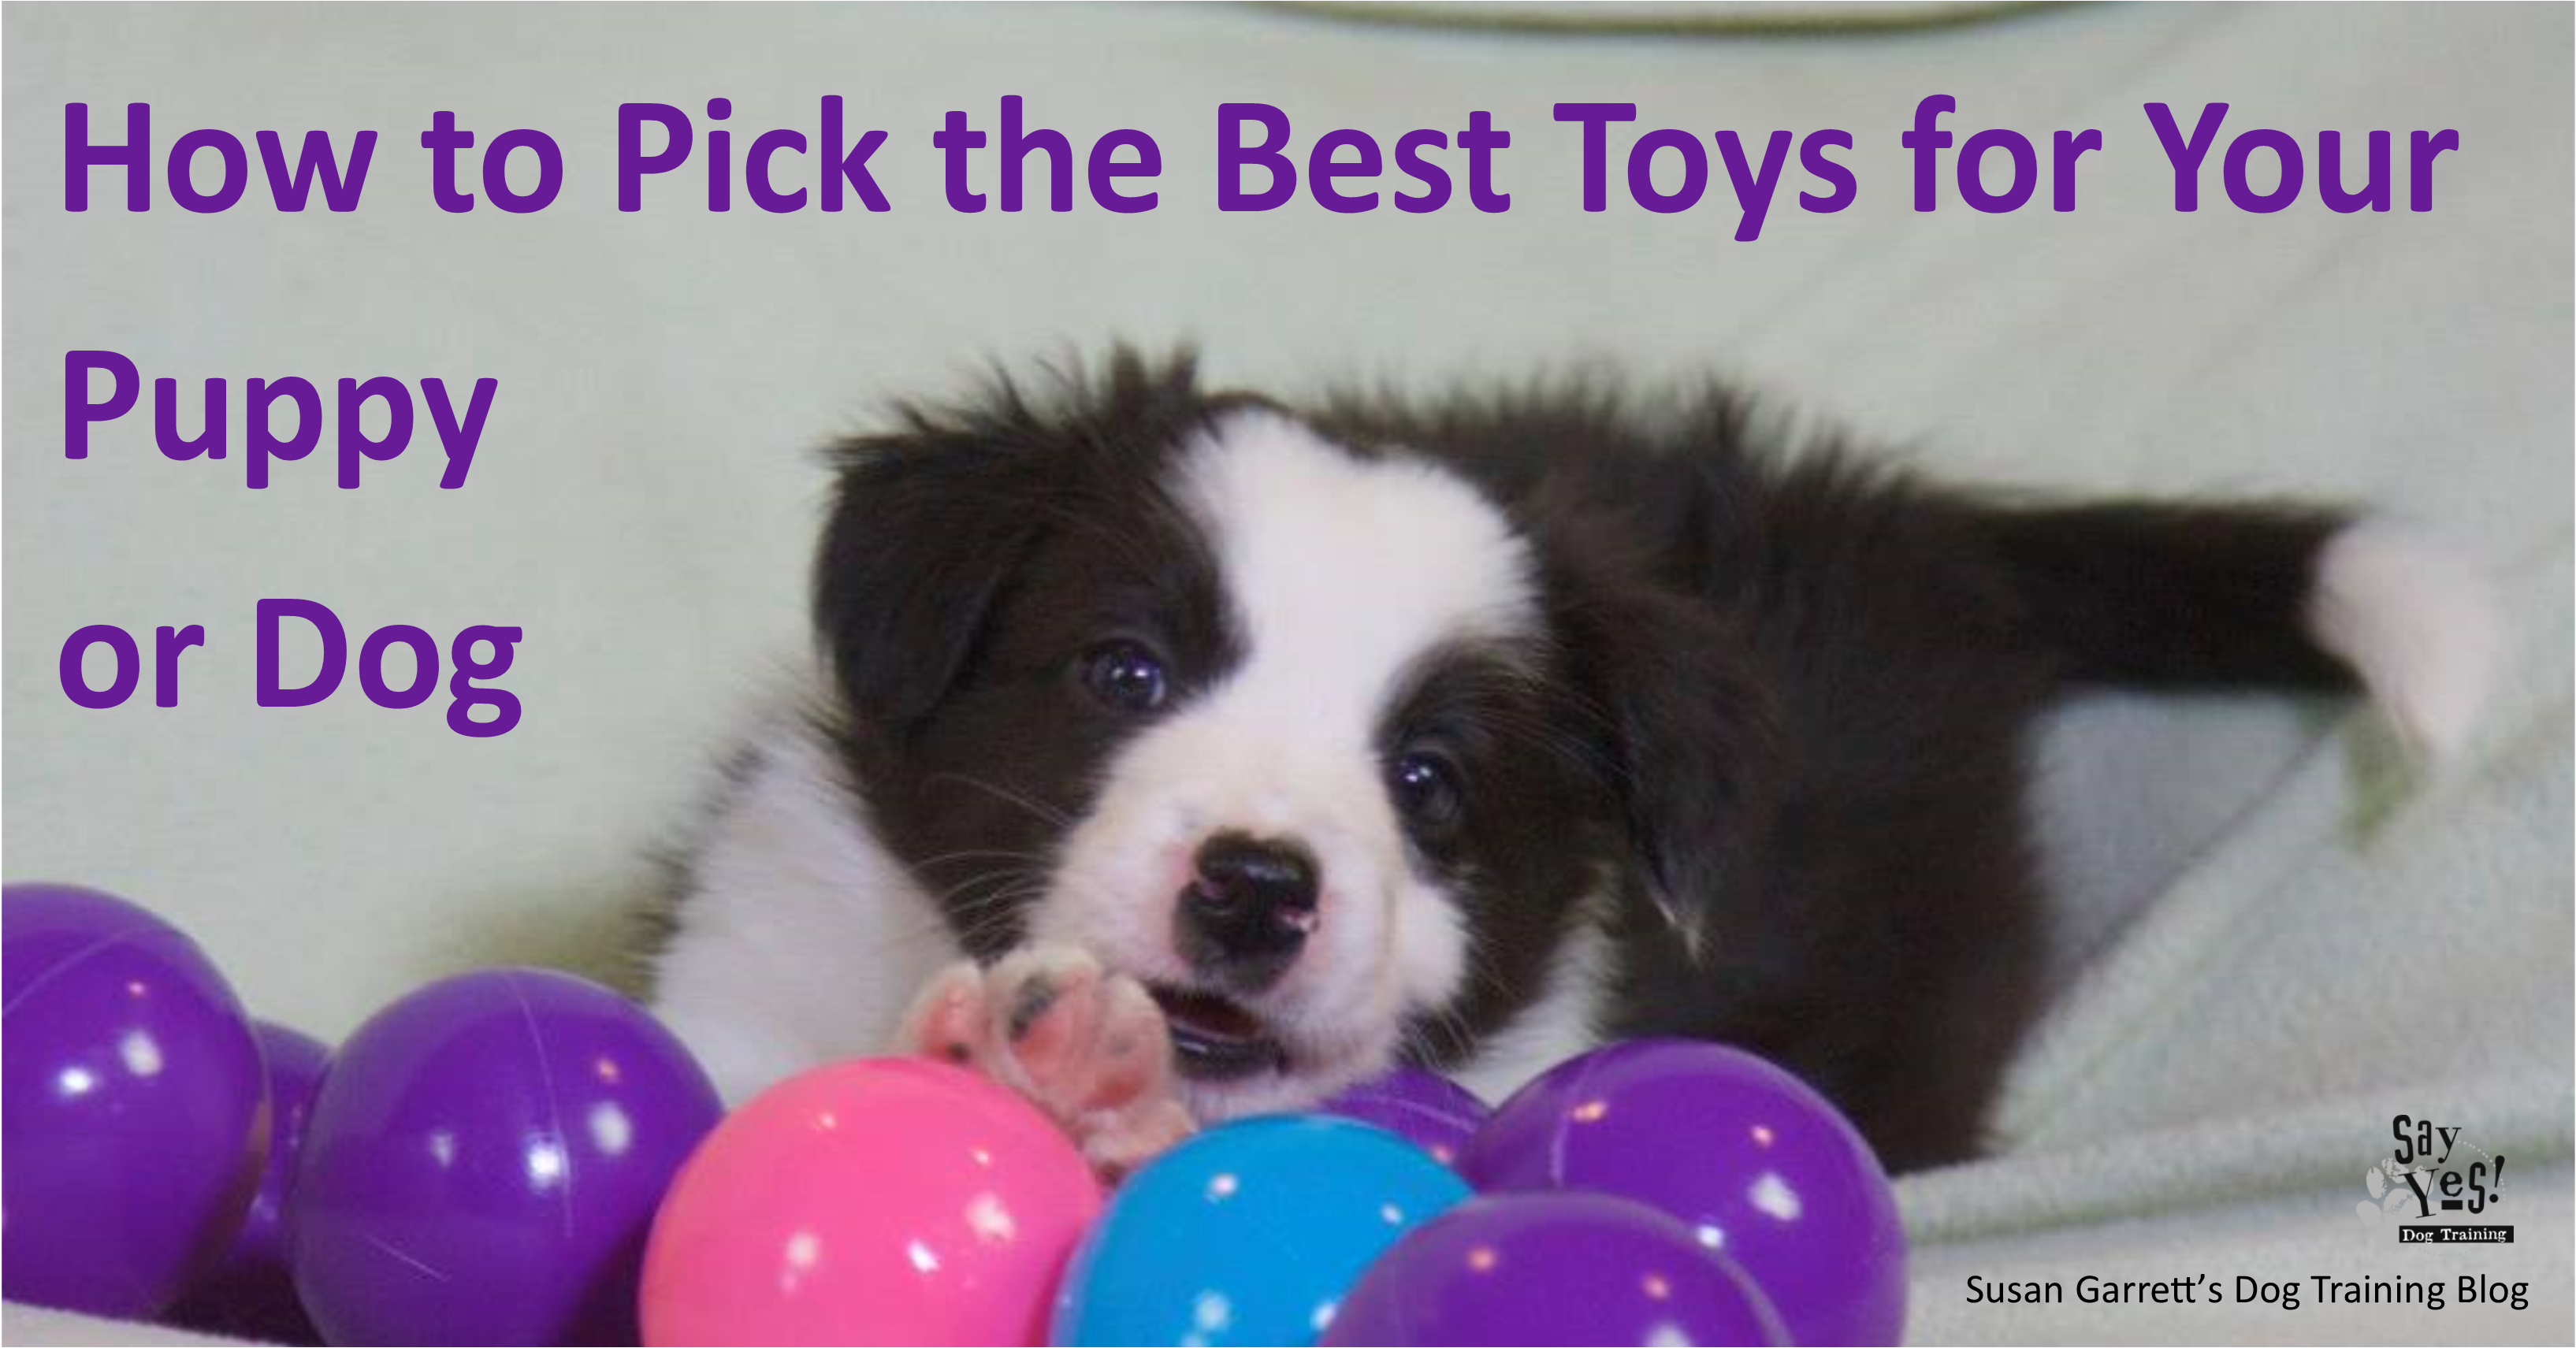 How to Pick the Best Toys for Your Puppy or Dog